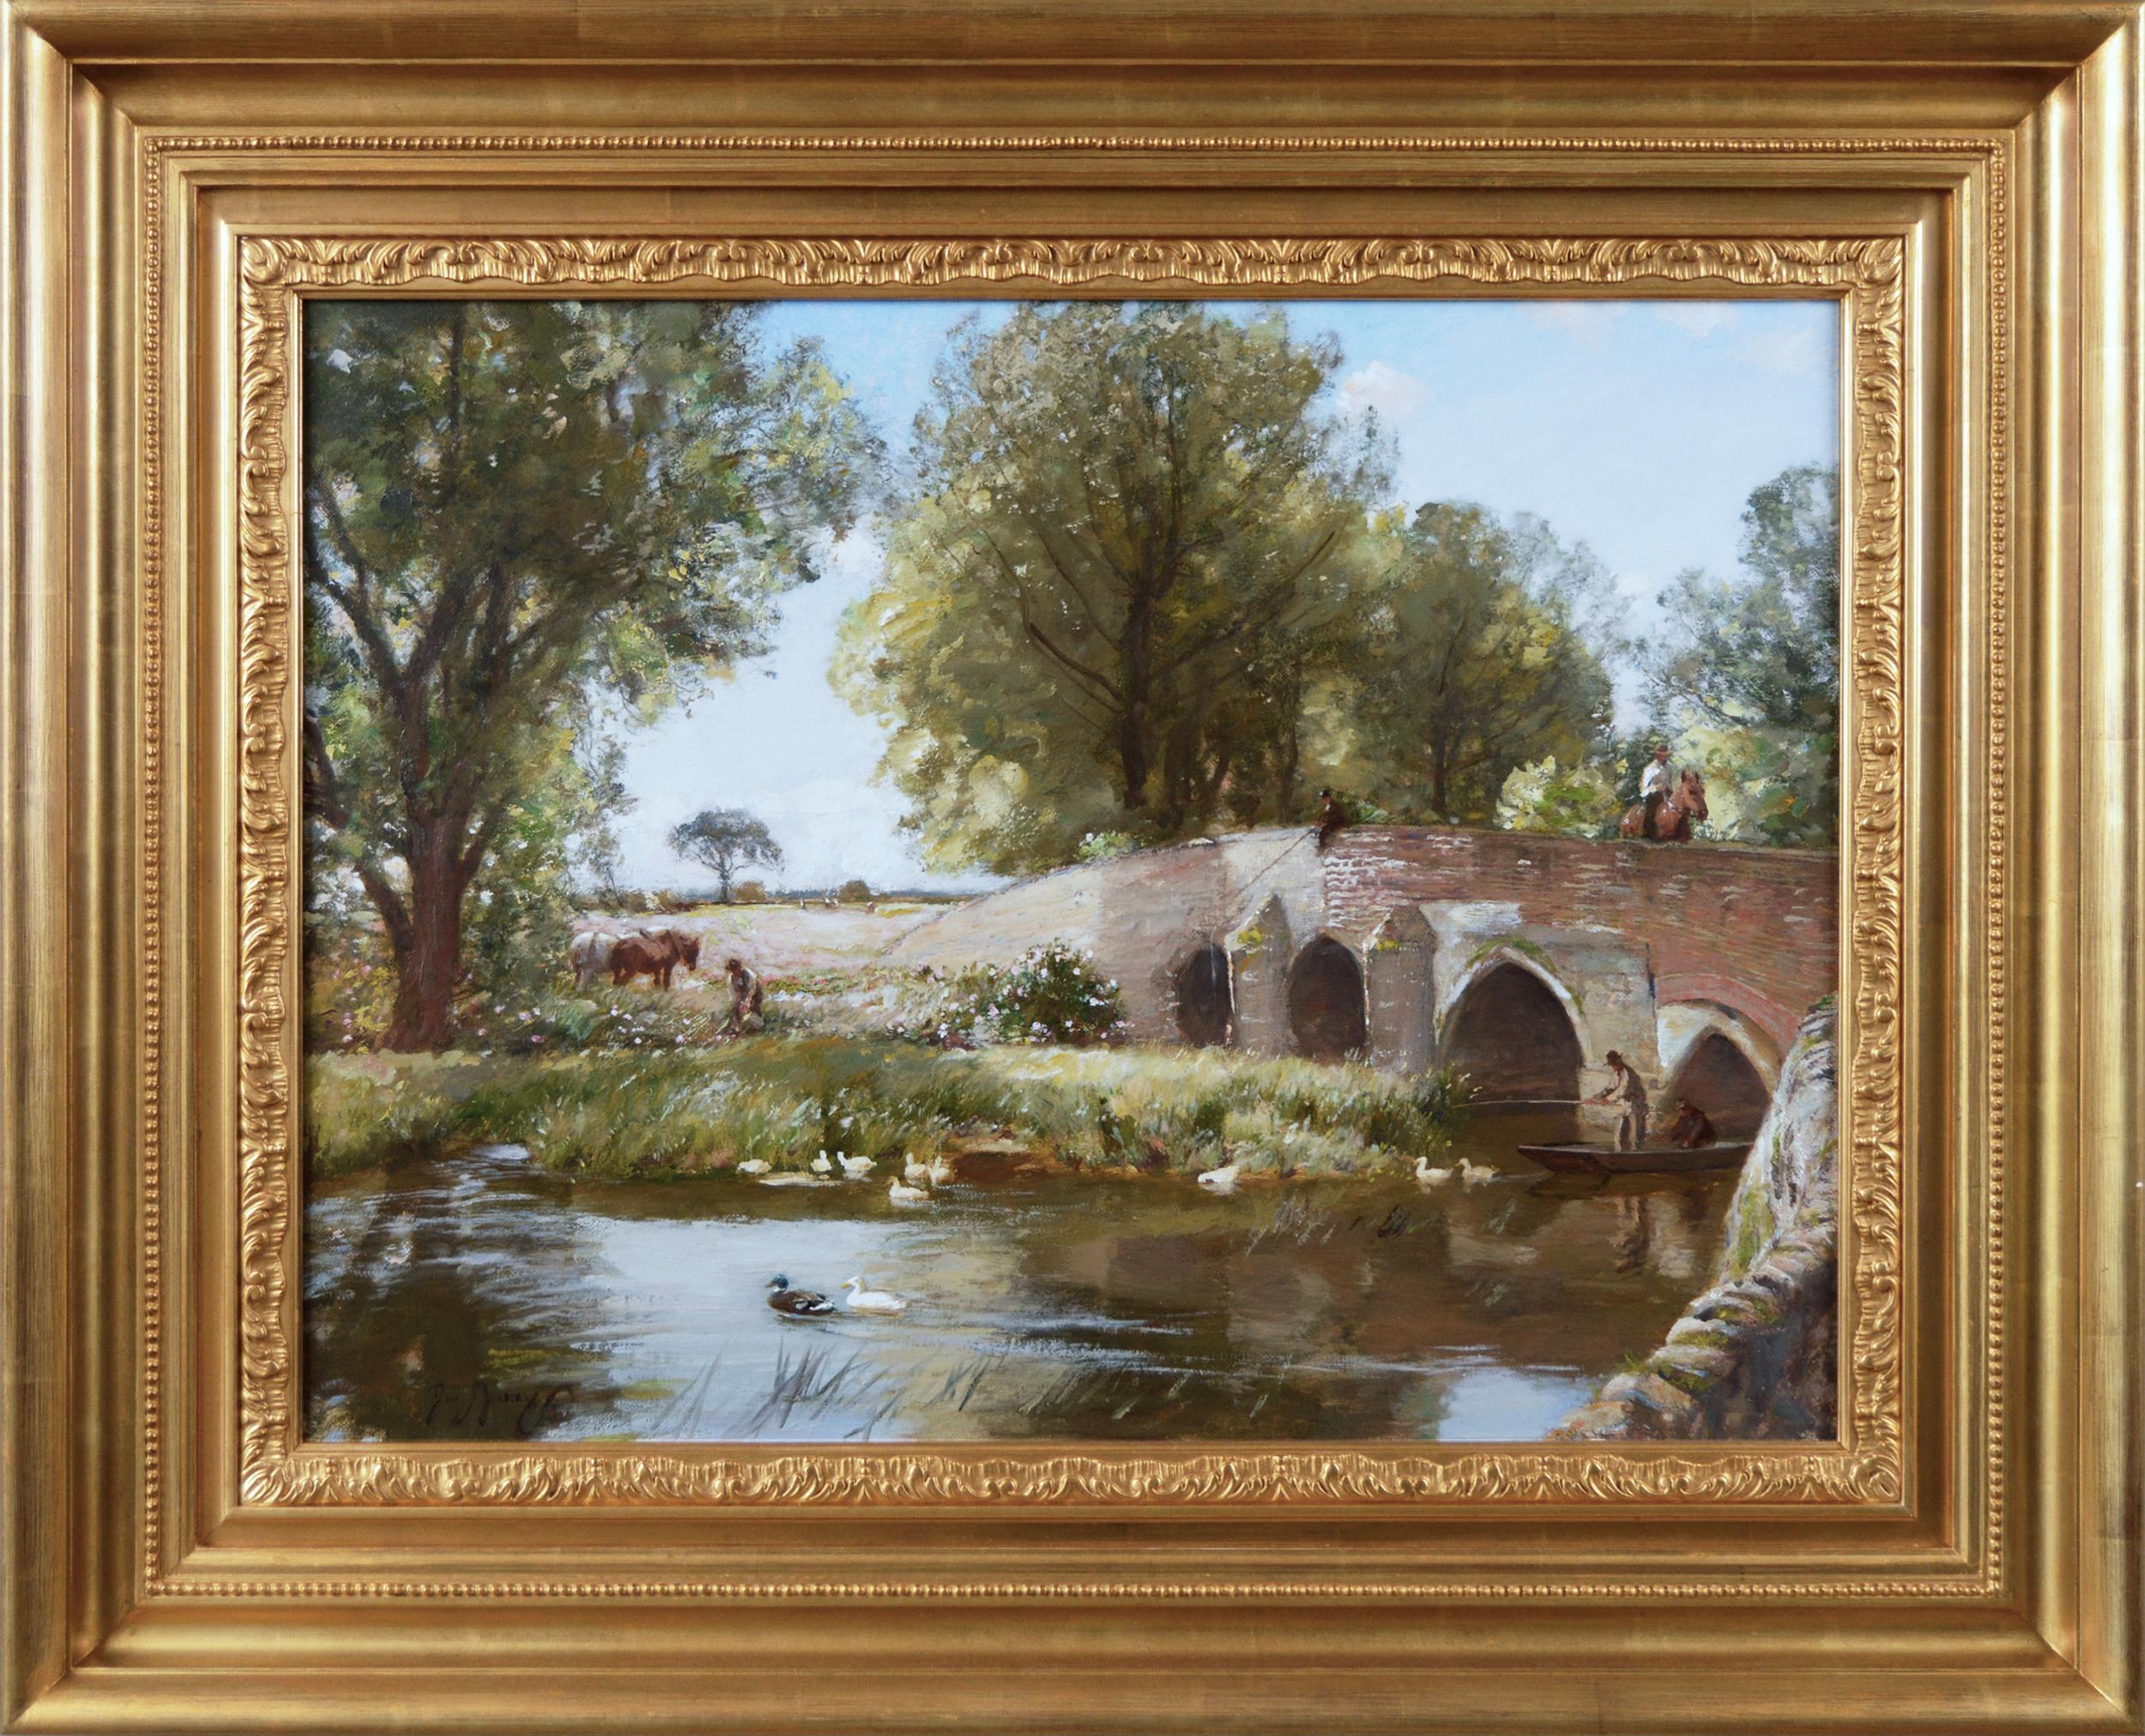 19th Century landscape oil painting of a bridge over a river